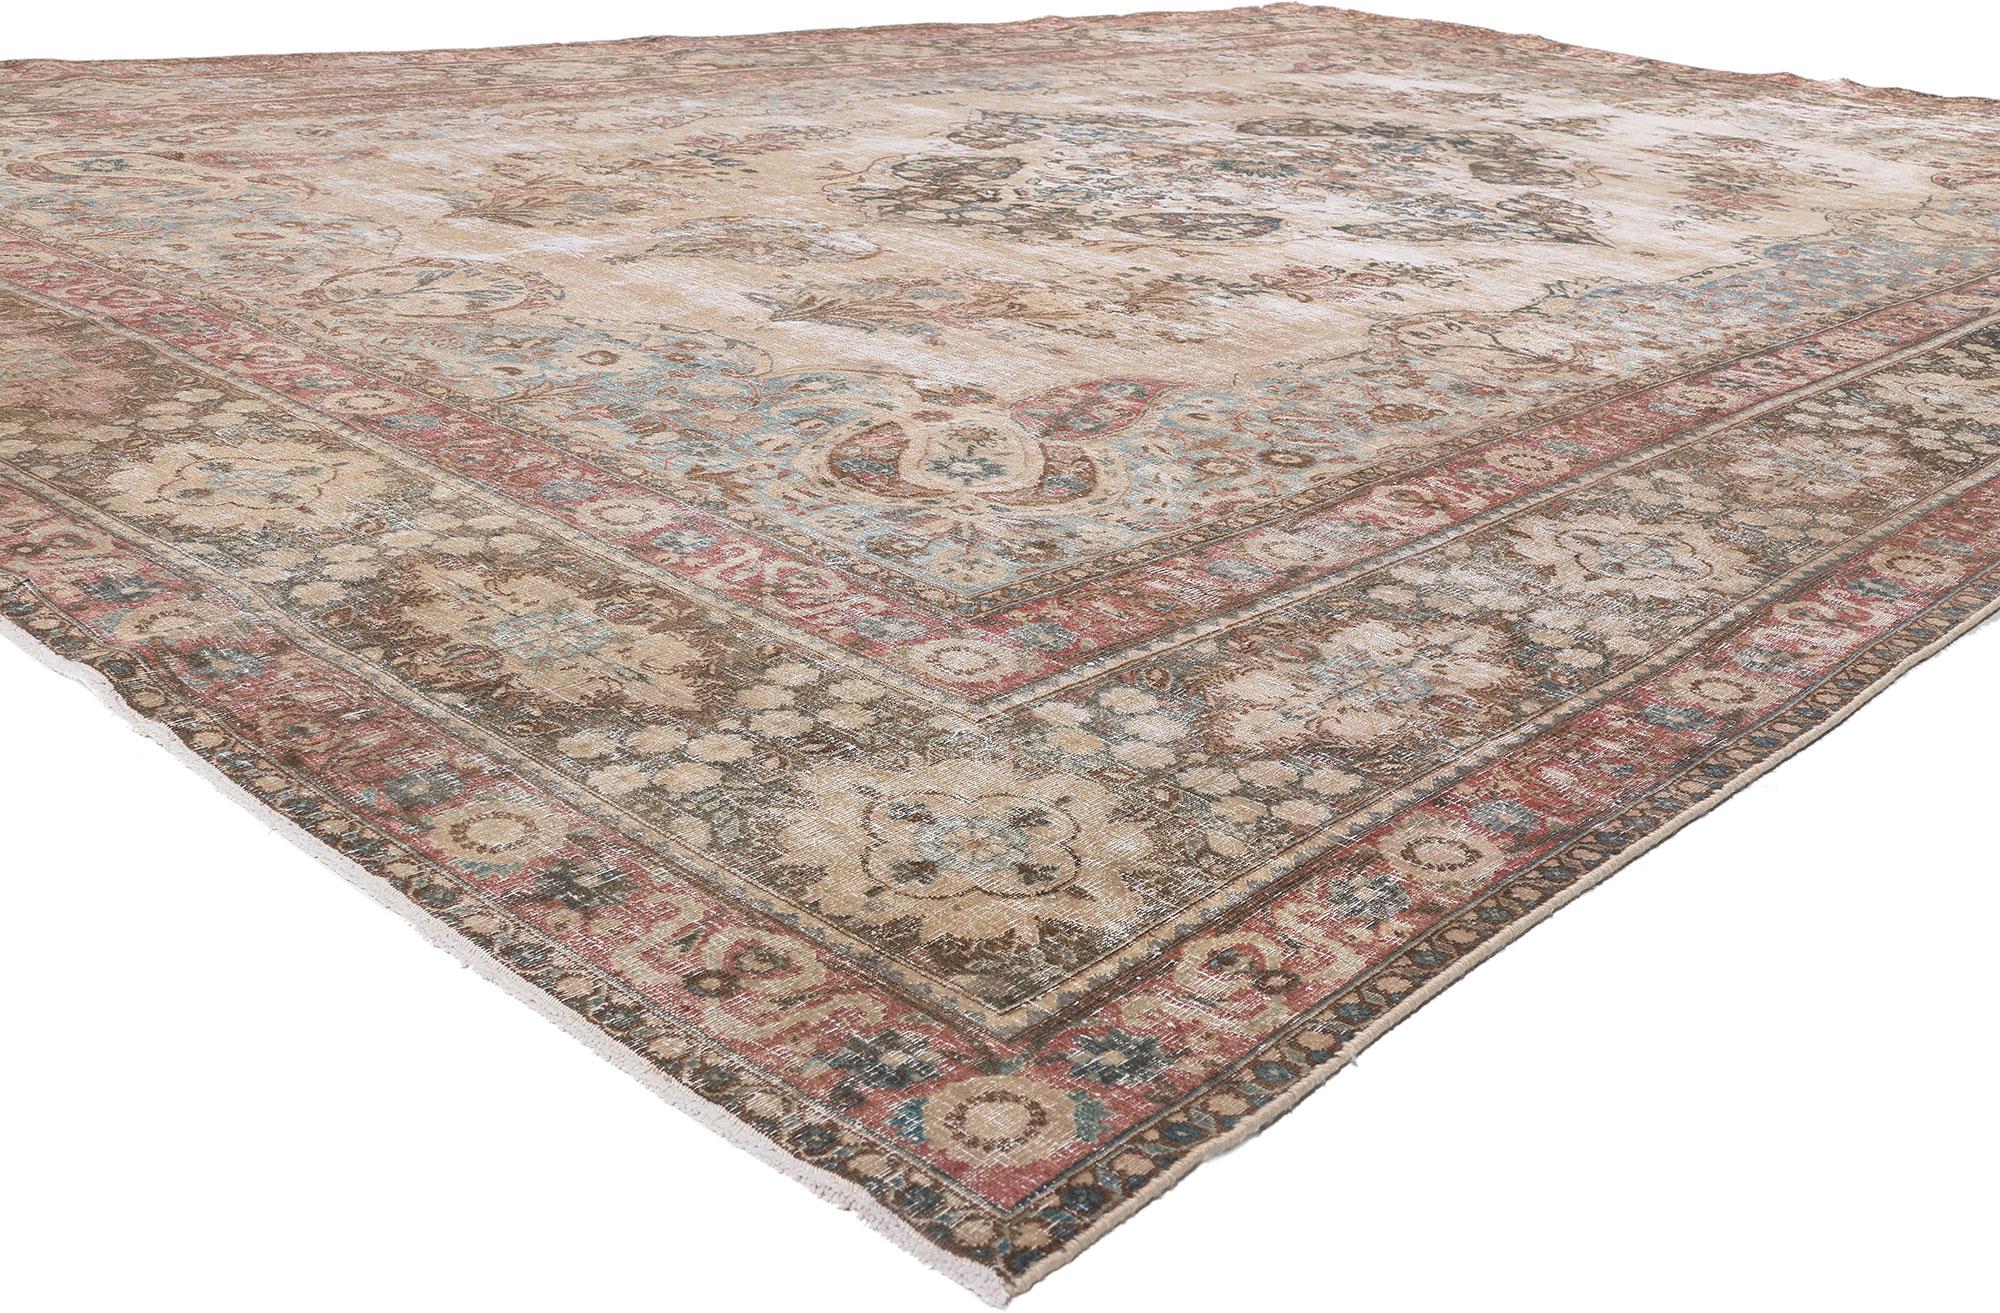 61259 Antique-Worn Persian Mashhad Rug, 10'06 x 16'02.
Weathered finesse meets Belgian chic in this hand knotted wool antique Persian Mashhad rug. The faded floral design and colors woven into this piece work together creating a rustic yet refined